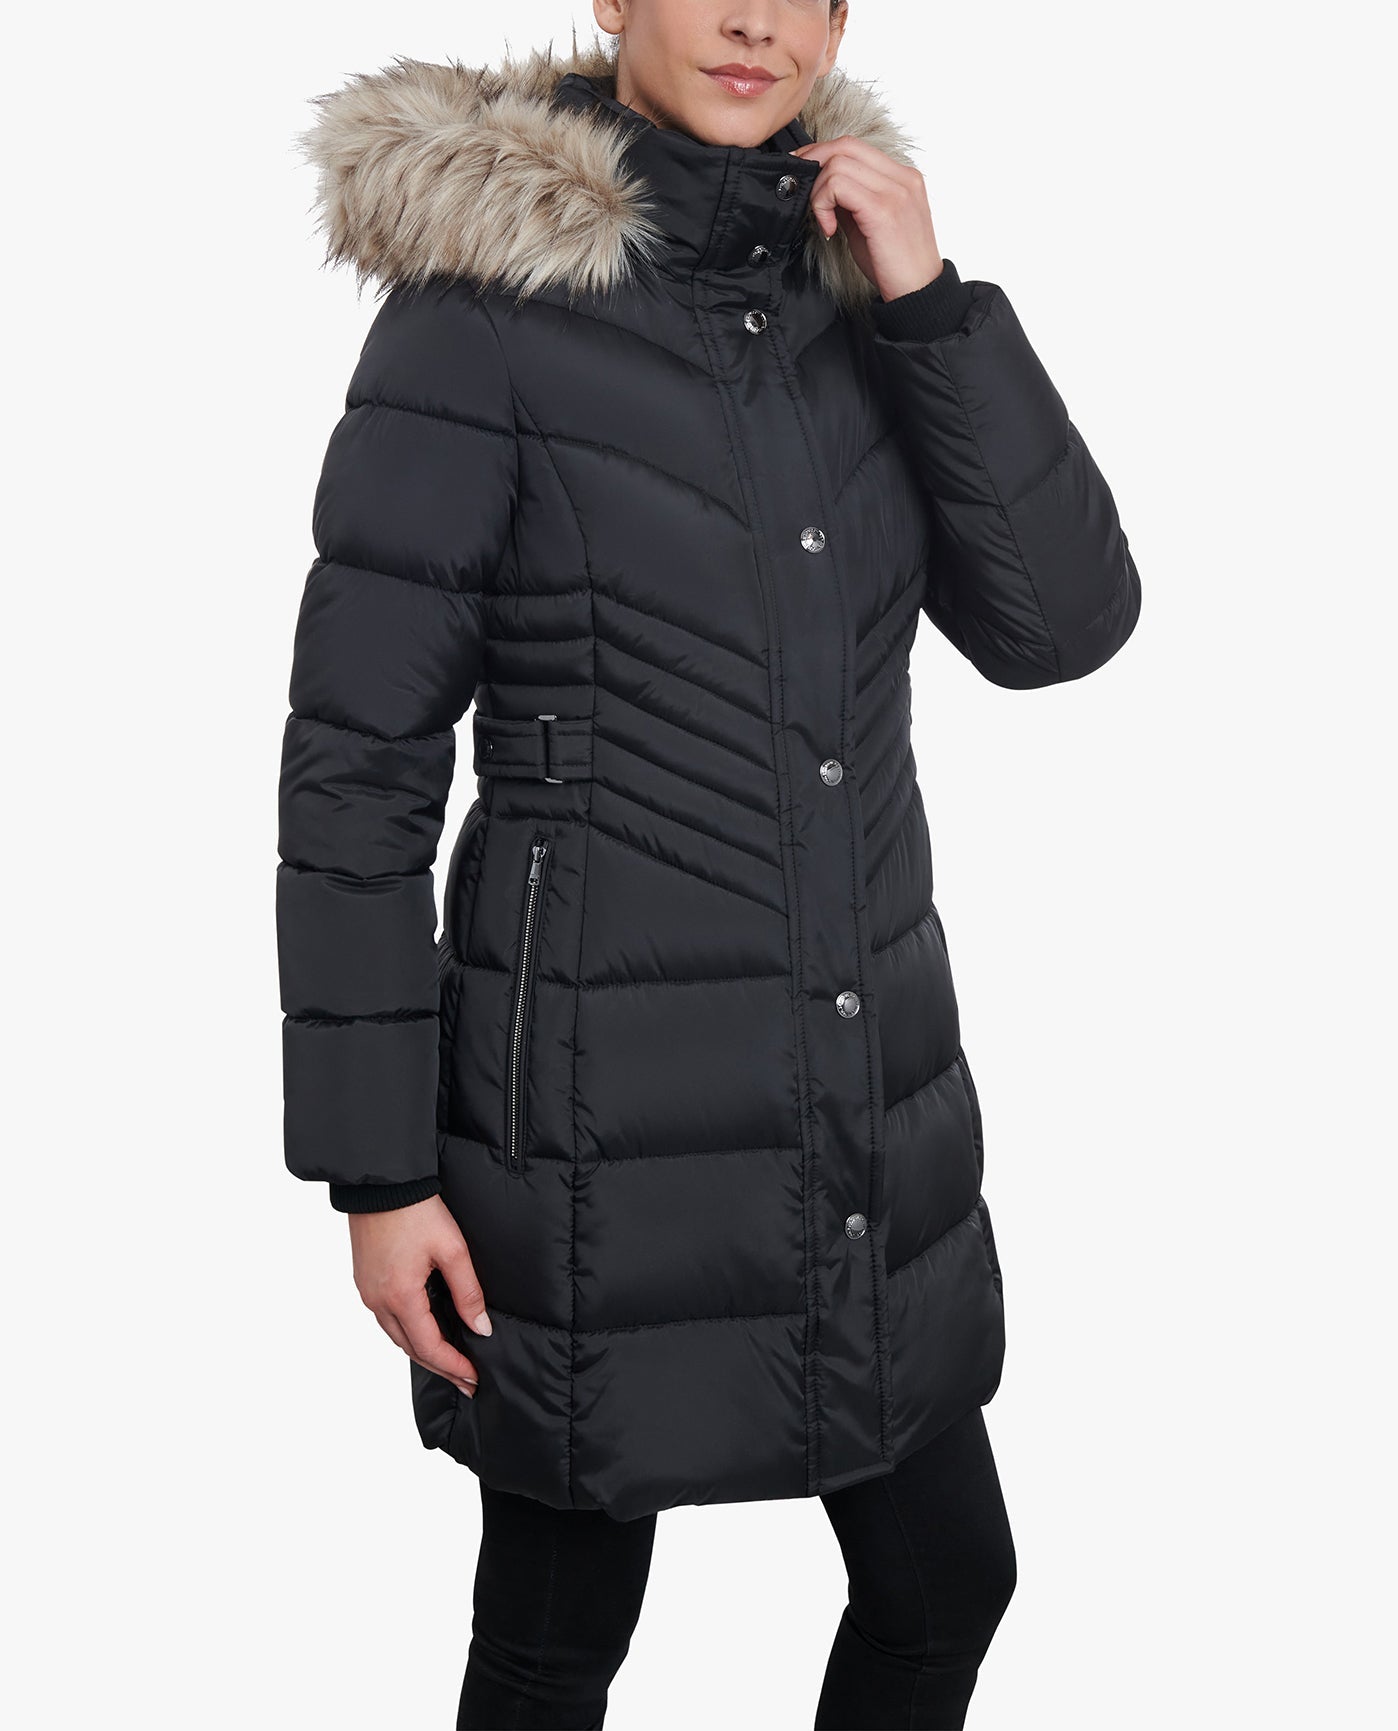 SIDE VIEW OF PLUS SIZE ZIP-FRONT LONG LENGTH PUFFER JACKET WITH ZIP-OFF FUR TRIM HOOD | BLACK